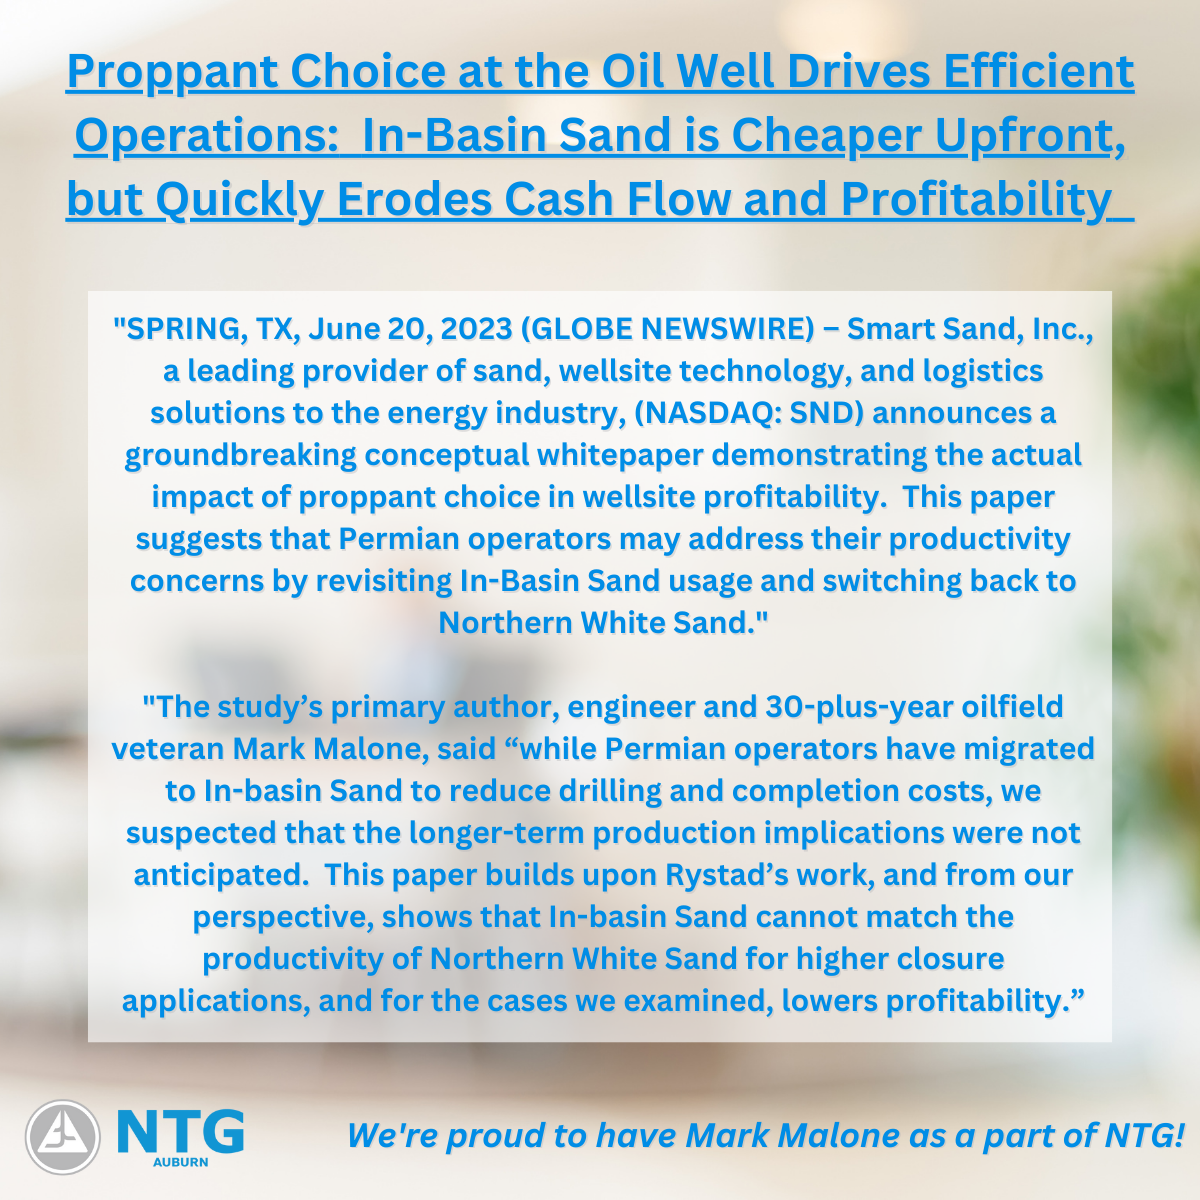 Proppant Choice at the Oil Well Drives Efficient Operations: In-Basin Sand is Cheaper Upfront, but Quickly Erodes Cash Flow and Profitability